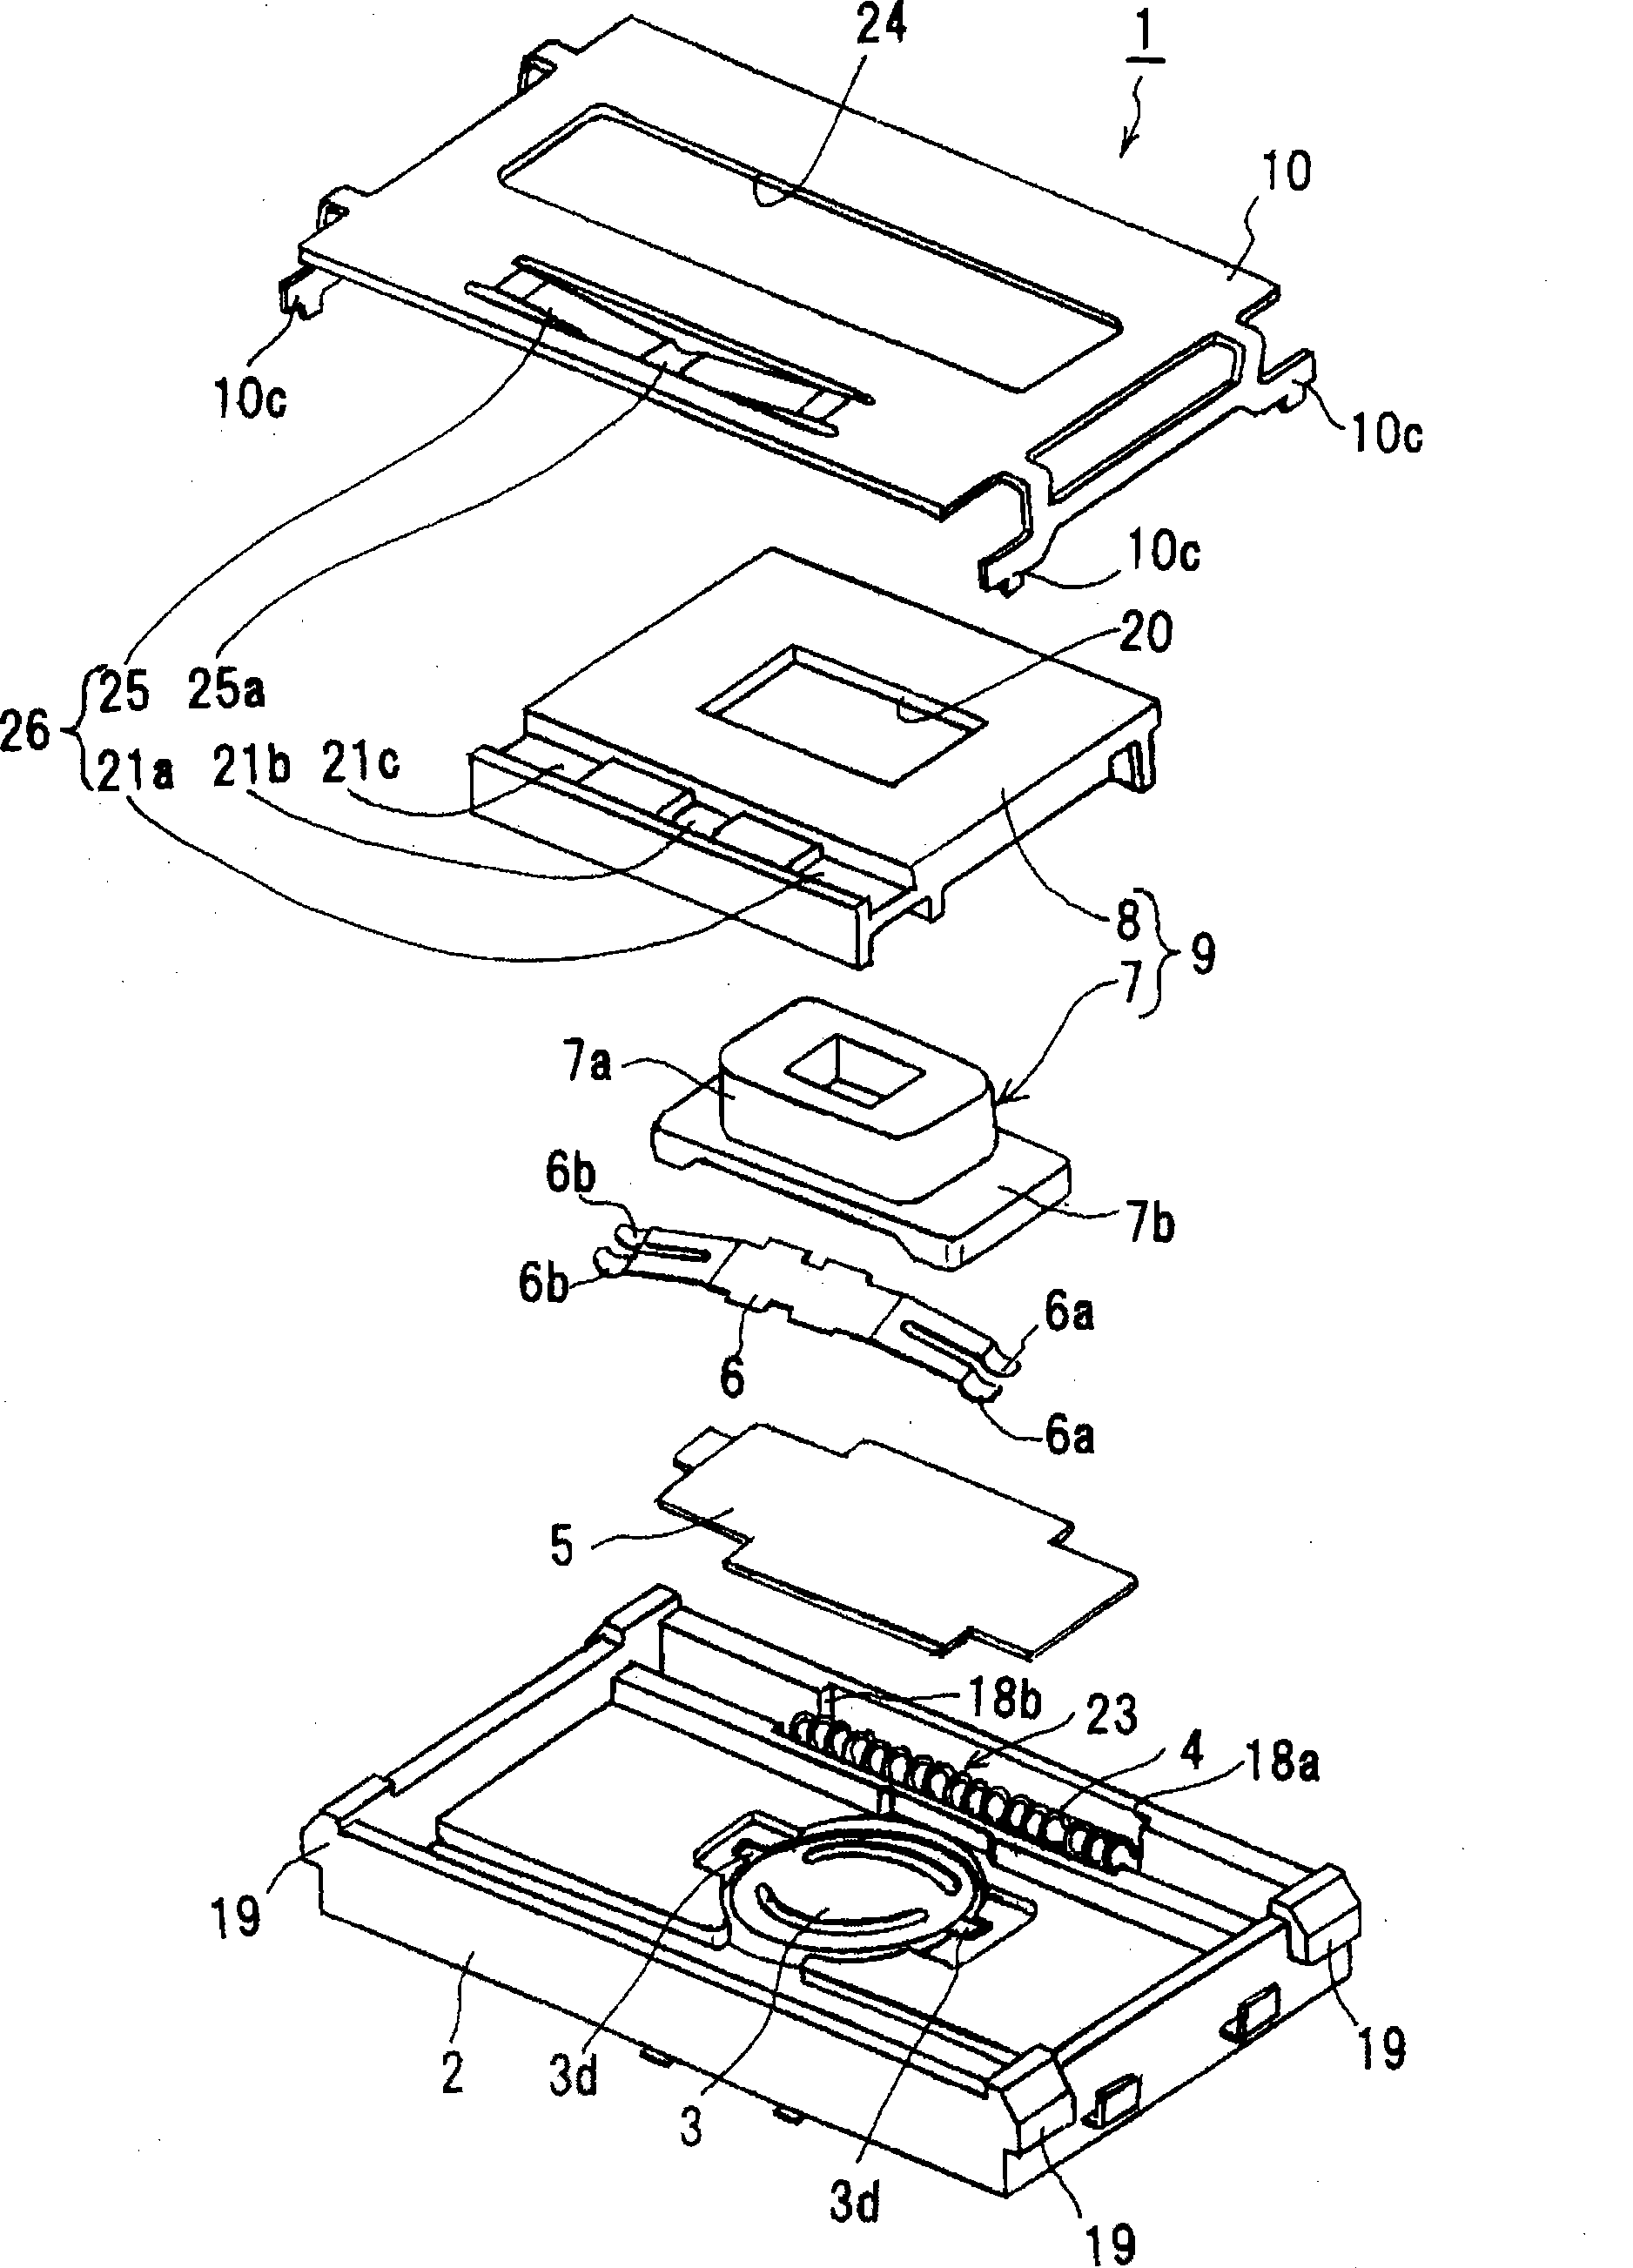 Transitional slide contact switch with twostage push-press switch